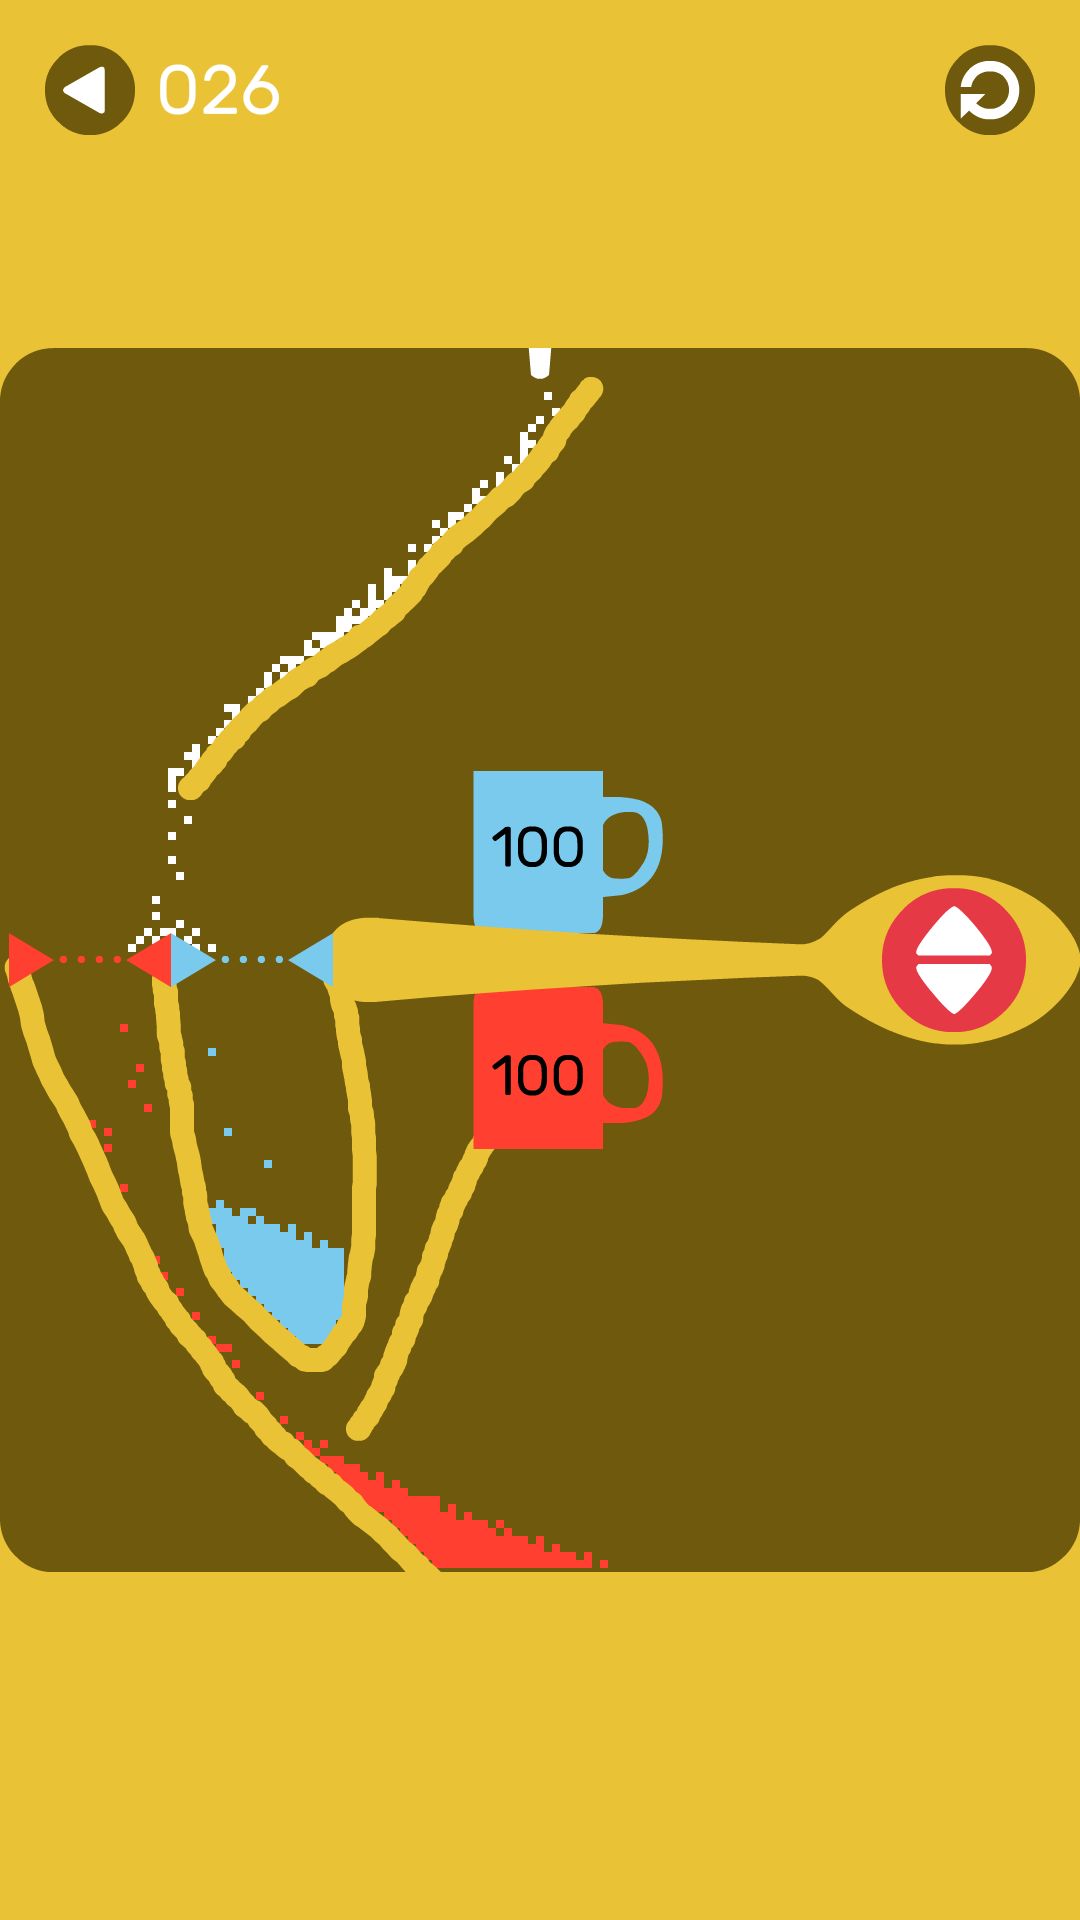 Gameplay of the sugar game for Android phone or tablet.